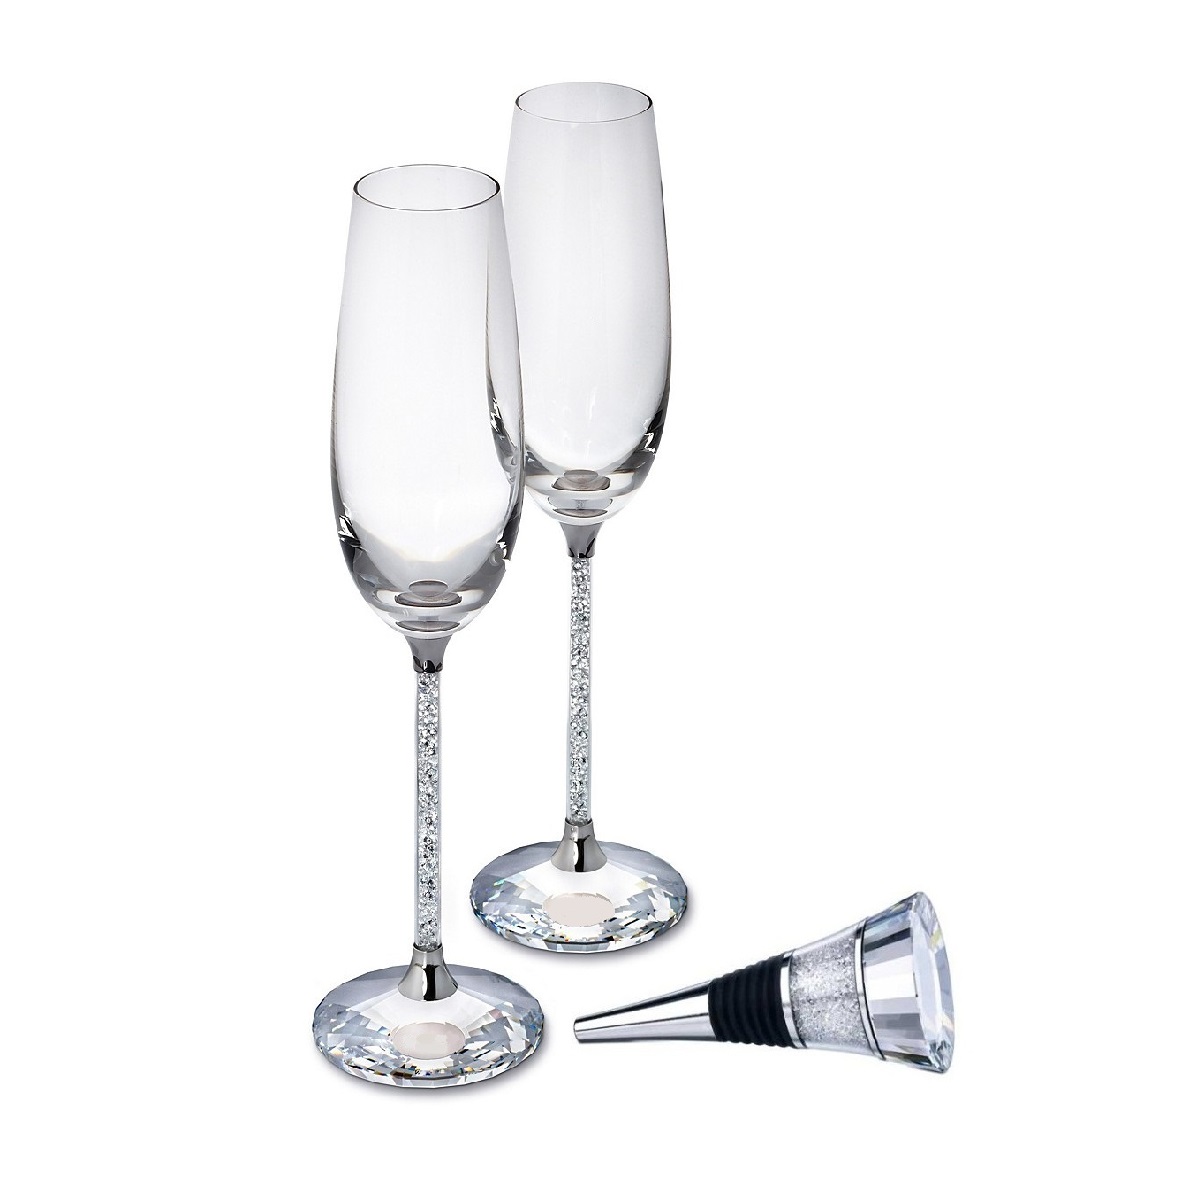 Crystal Champagne Flutes Glasses Tall Stem Filled with Finest Czech Crystals Pair Most Perfect Gift for Wedding Anniversary Engagement 